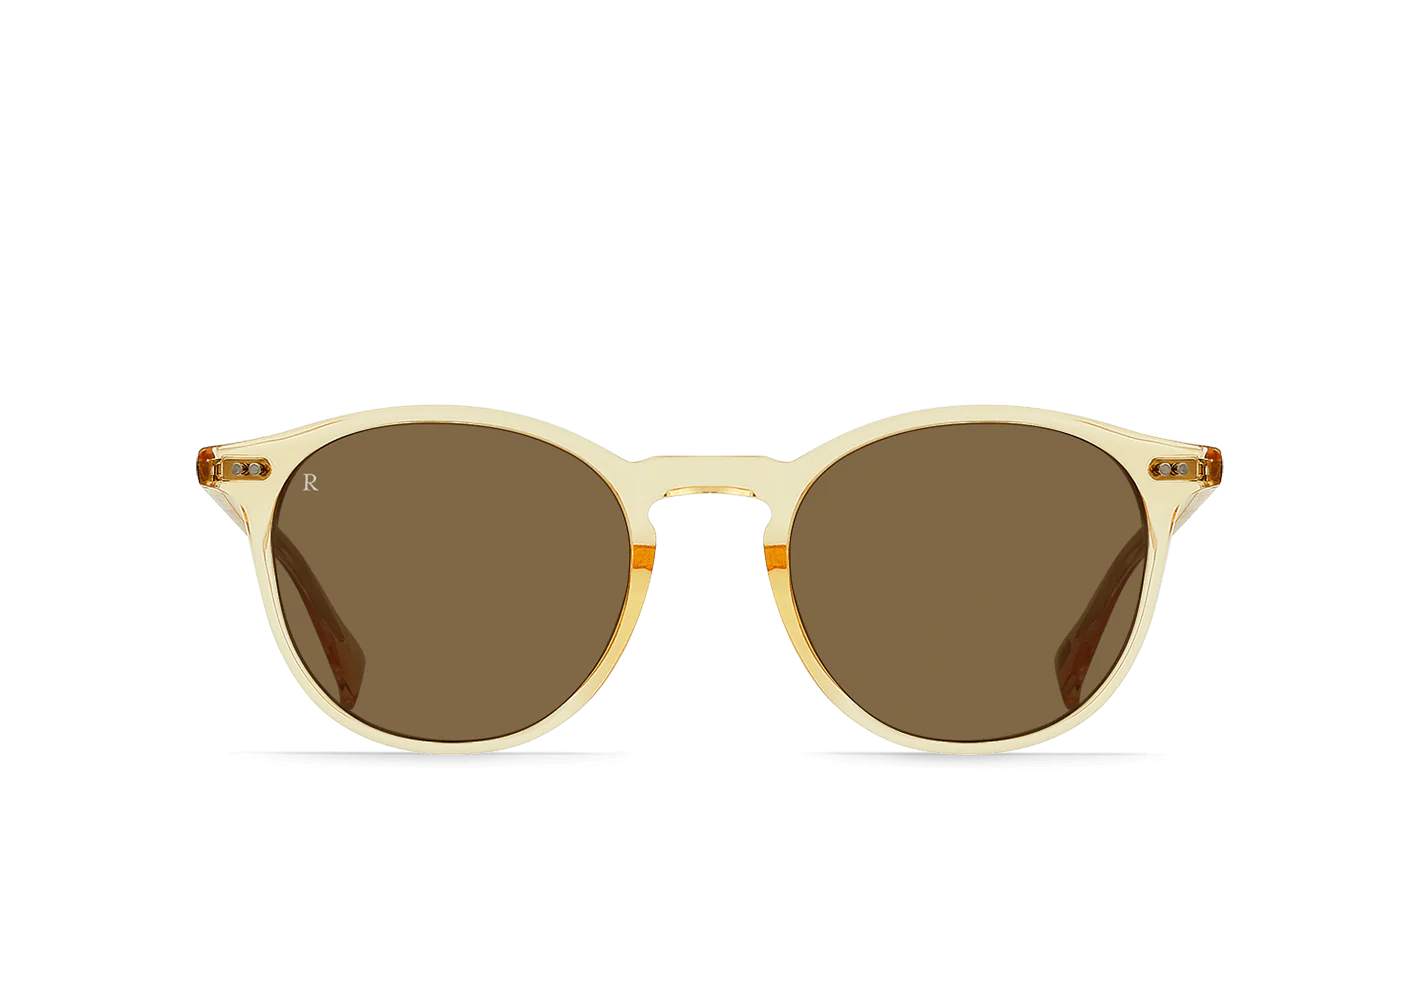 RAEN's Basq Round Sunglasses with Champagne Crystal frames and Suntan lenses.